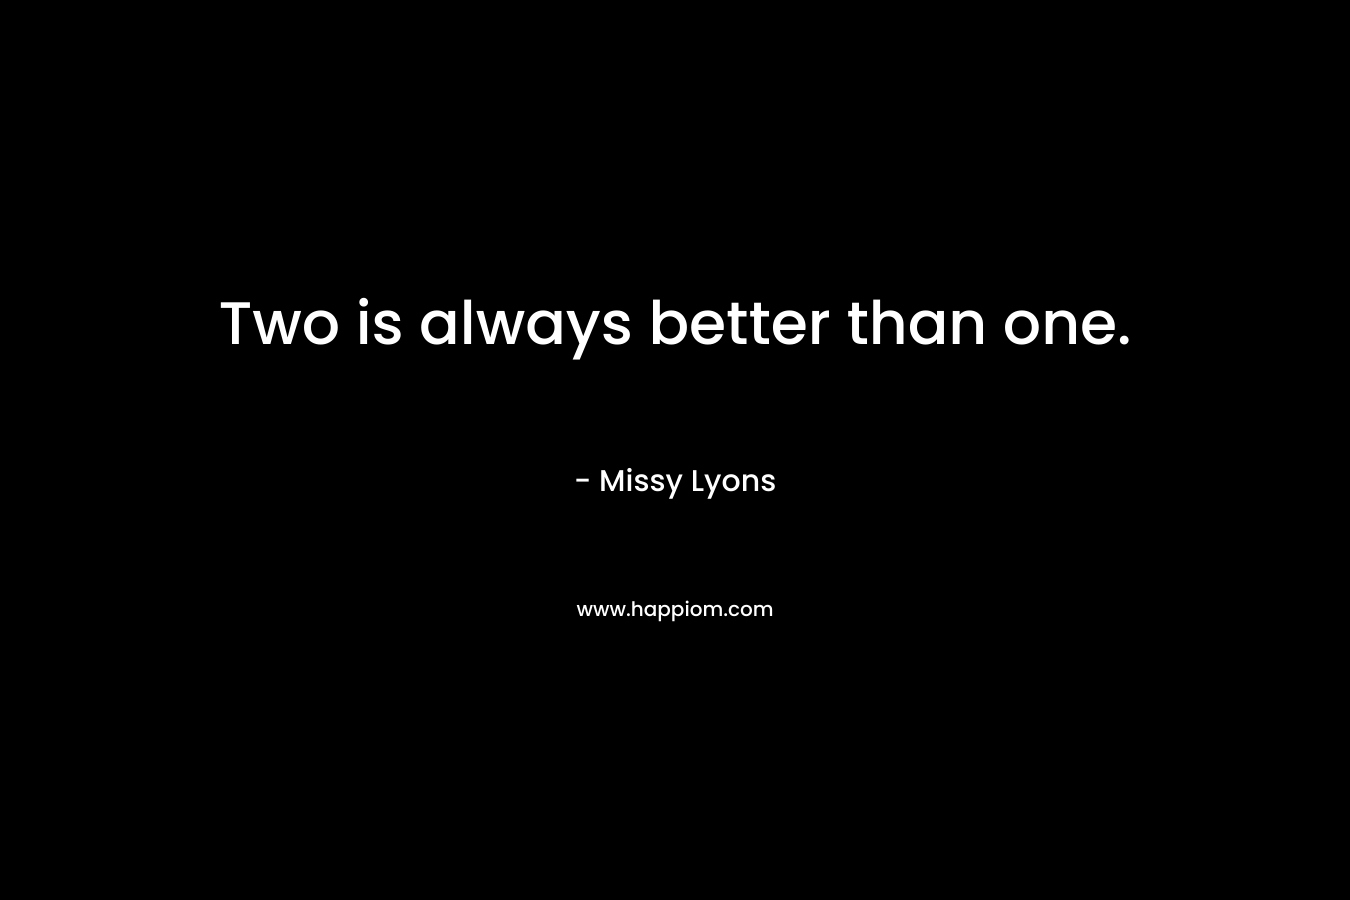 Two is always better than one. – Missy Lyons